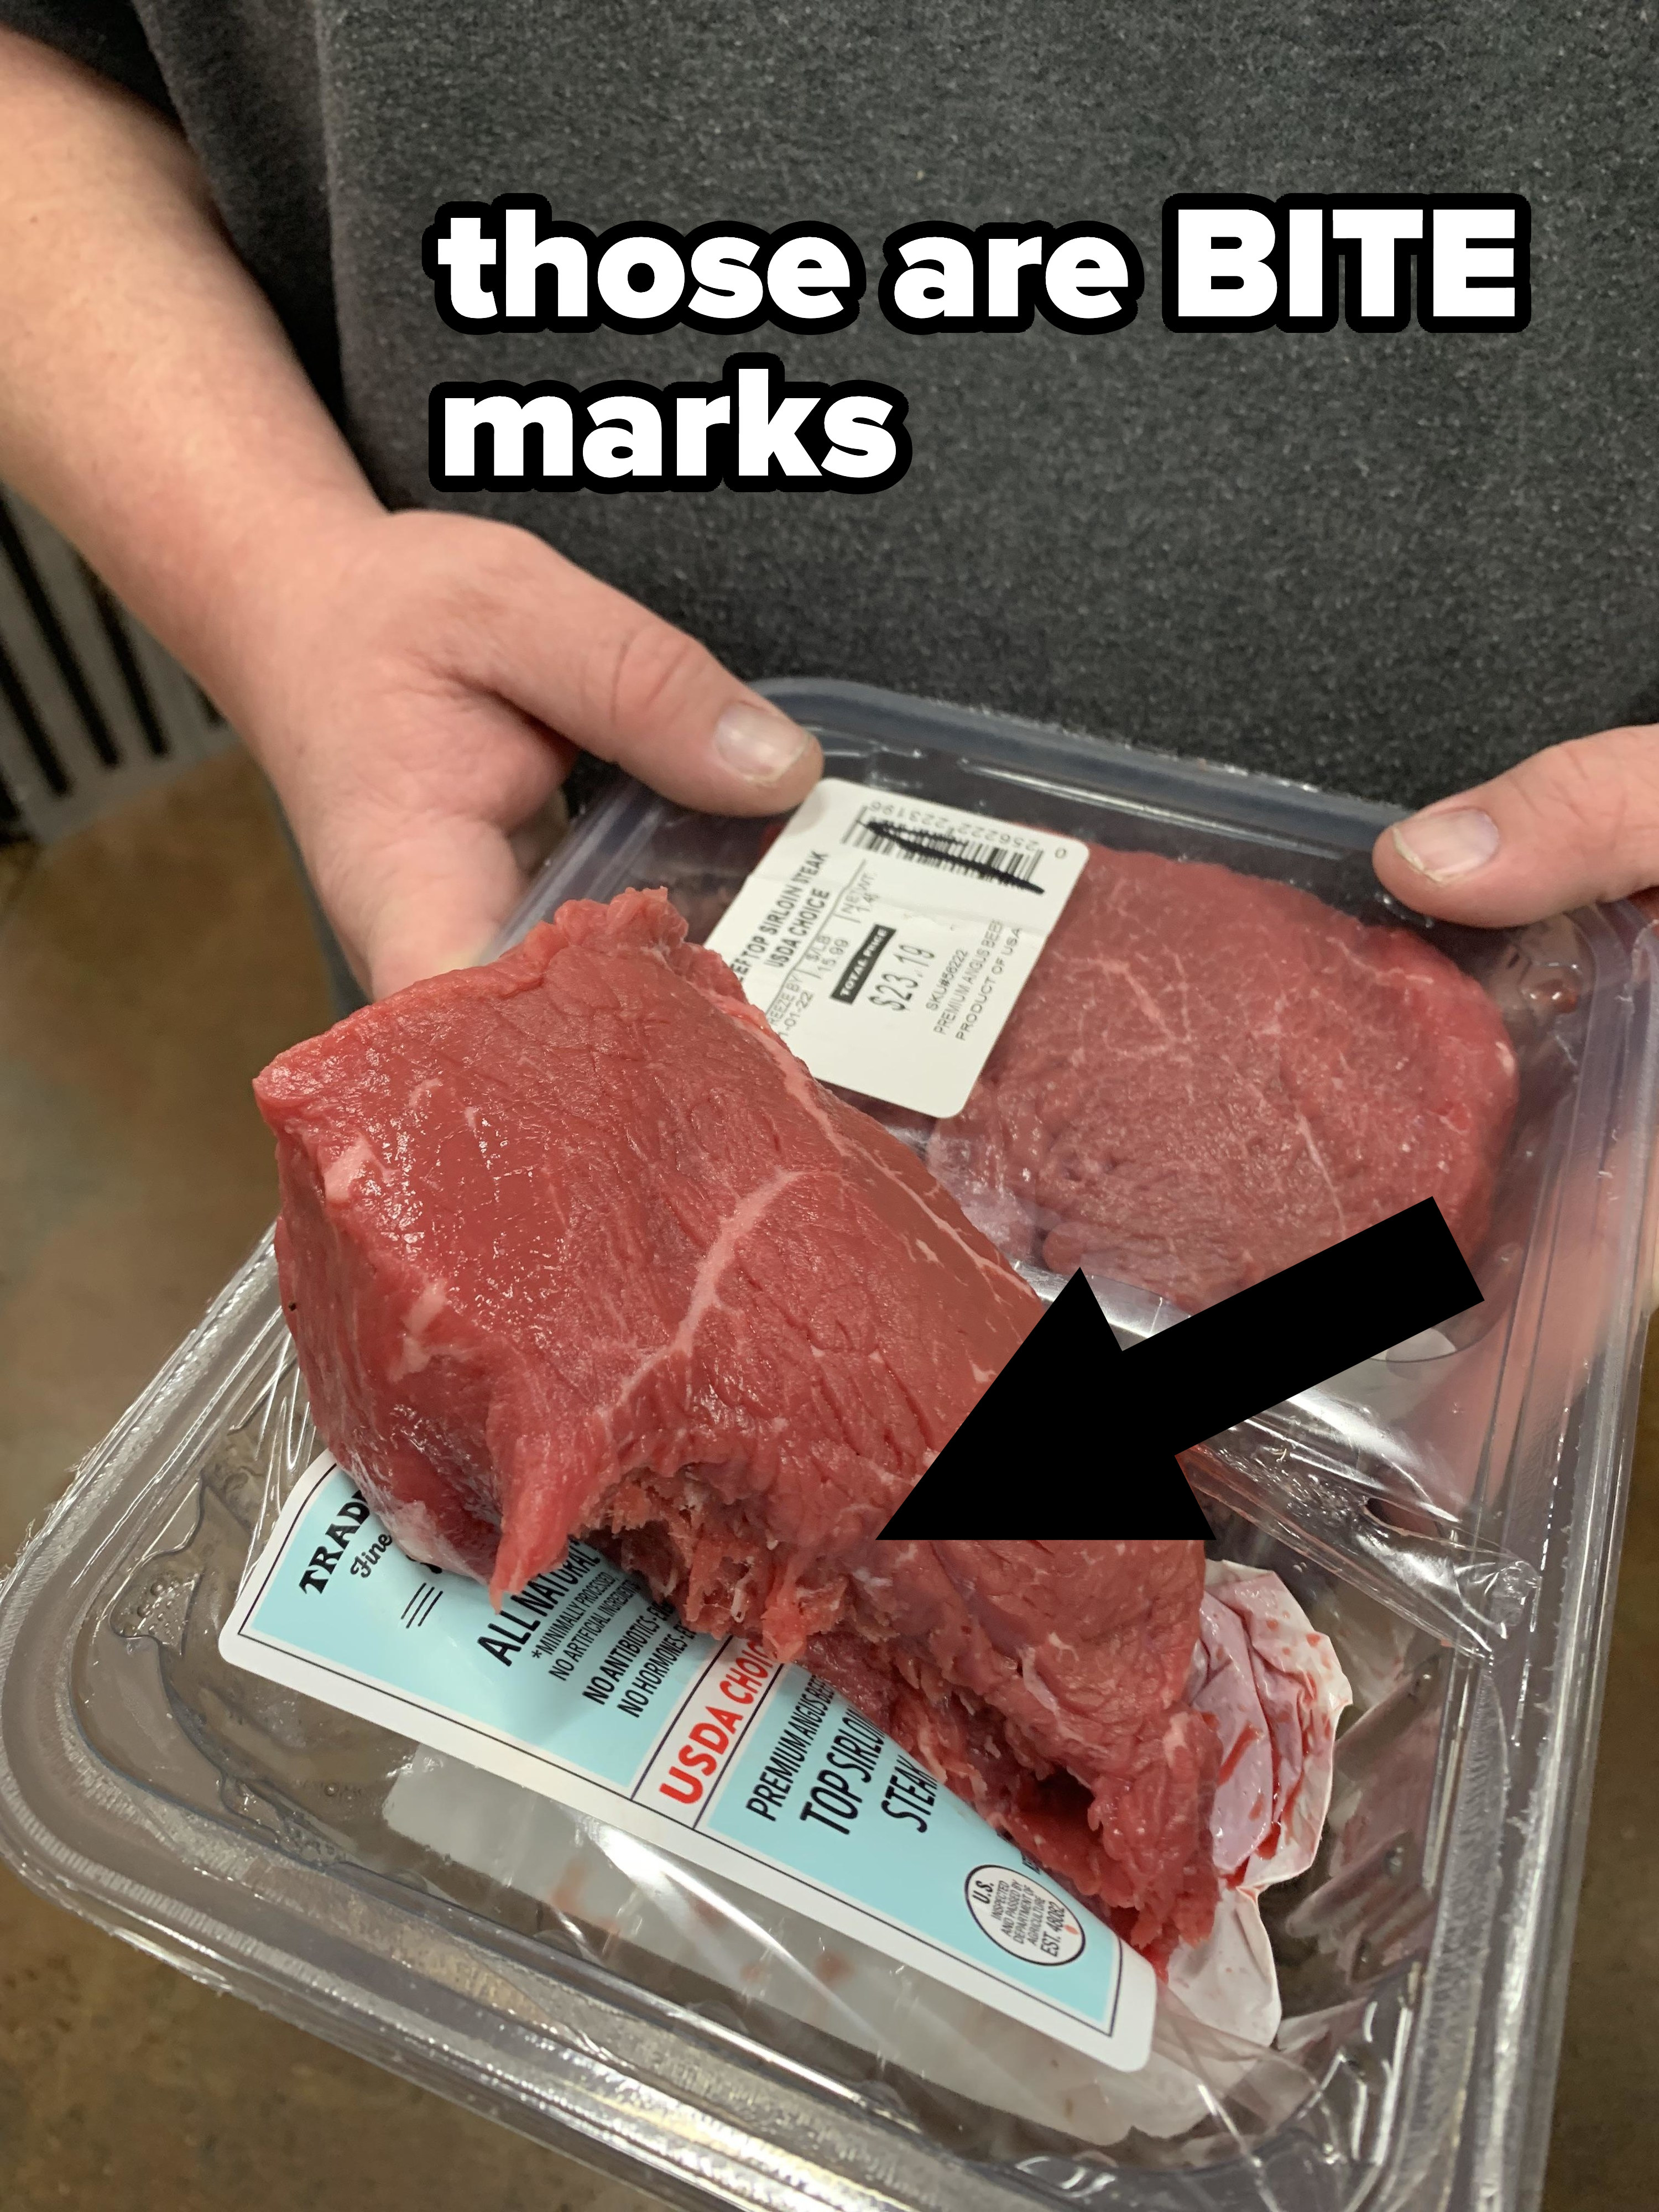 Raw meat with bite marks